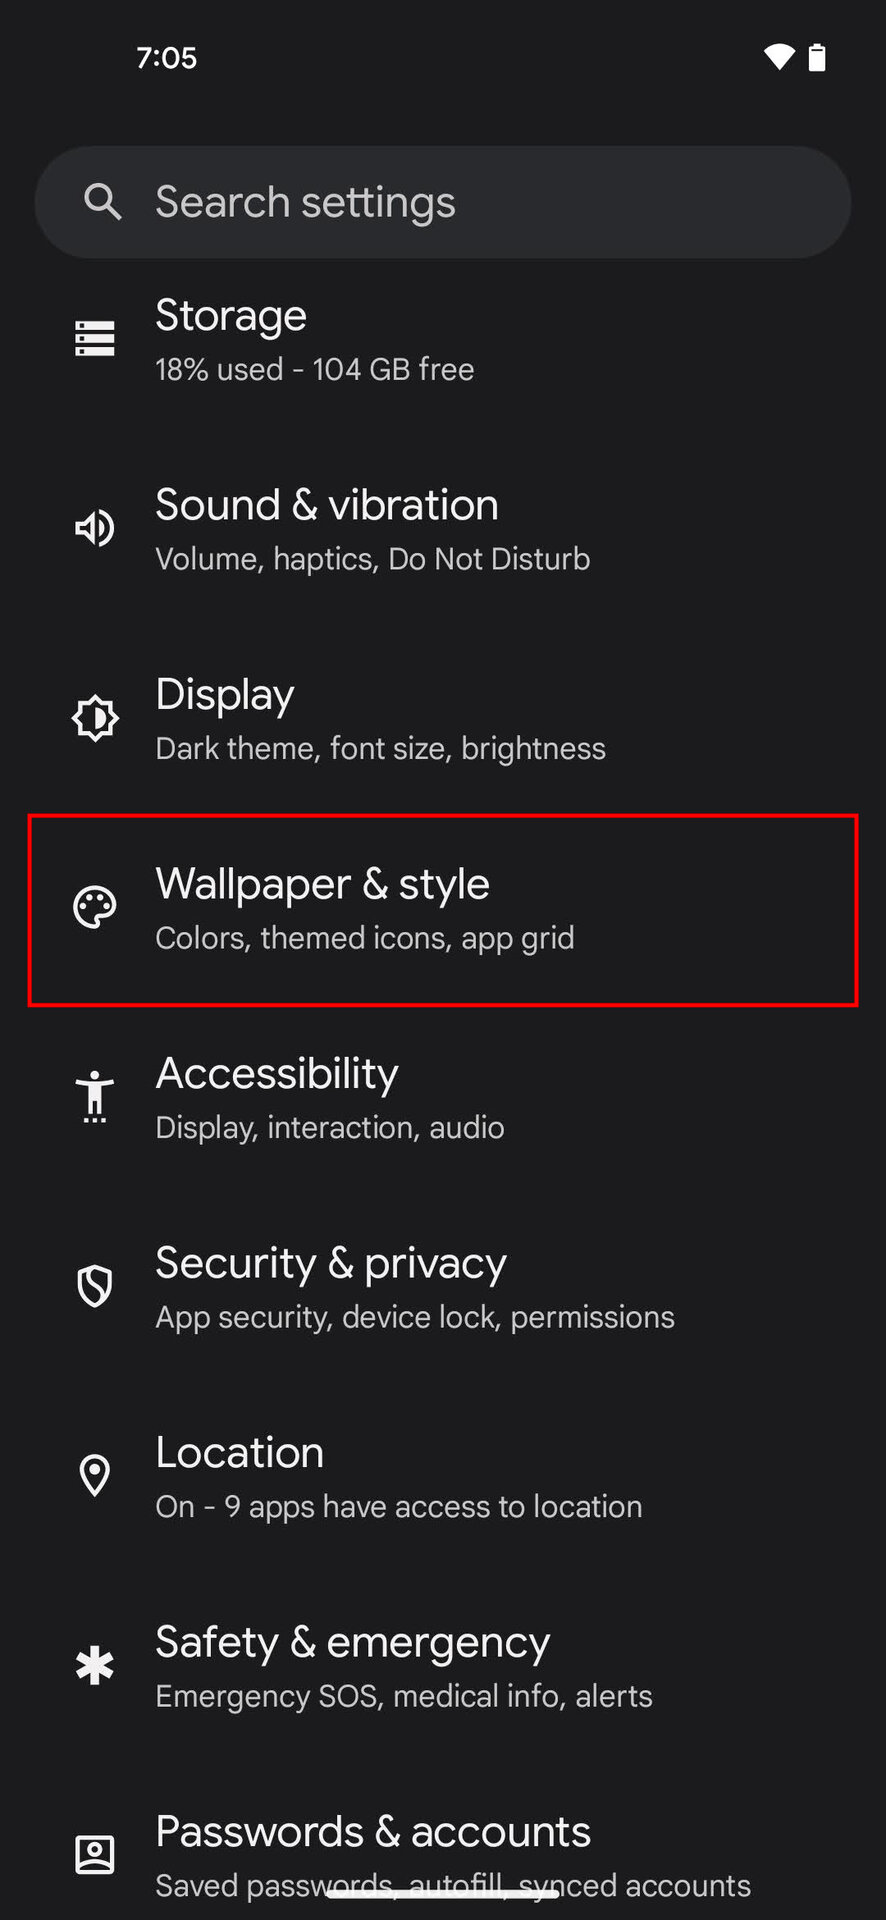 how to set live wallpaper in windows 7,8,8.1,10 64 or 32 bit for free 